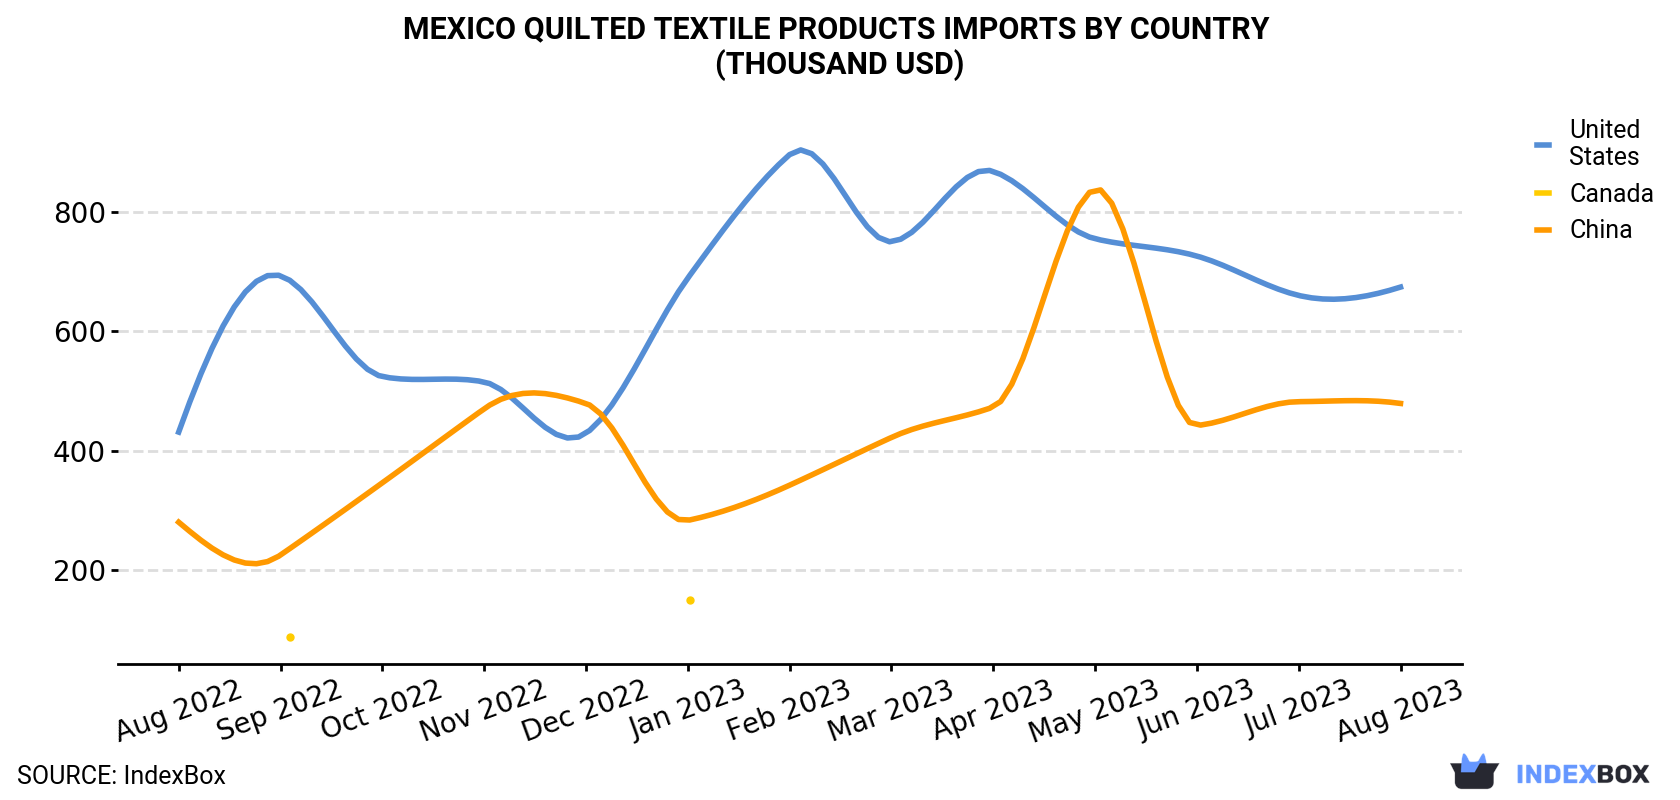 Mexico Quilted Textile Products Imports By Country (Thousand USD)